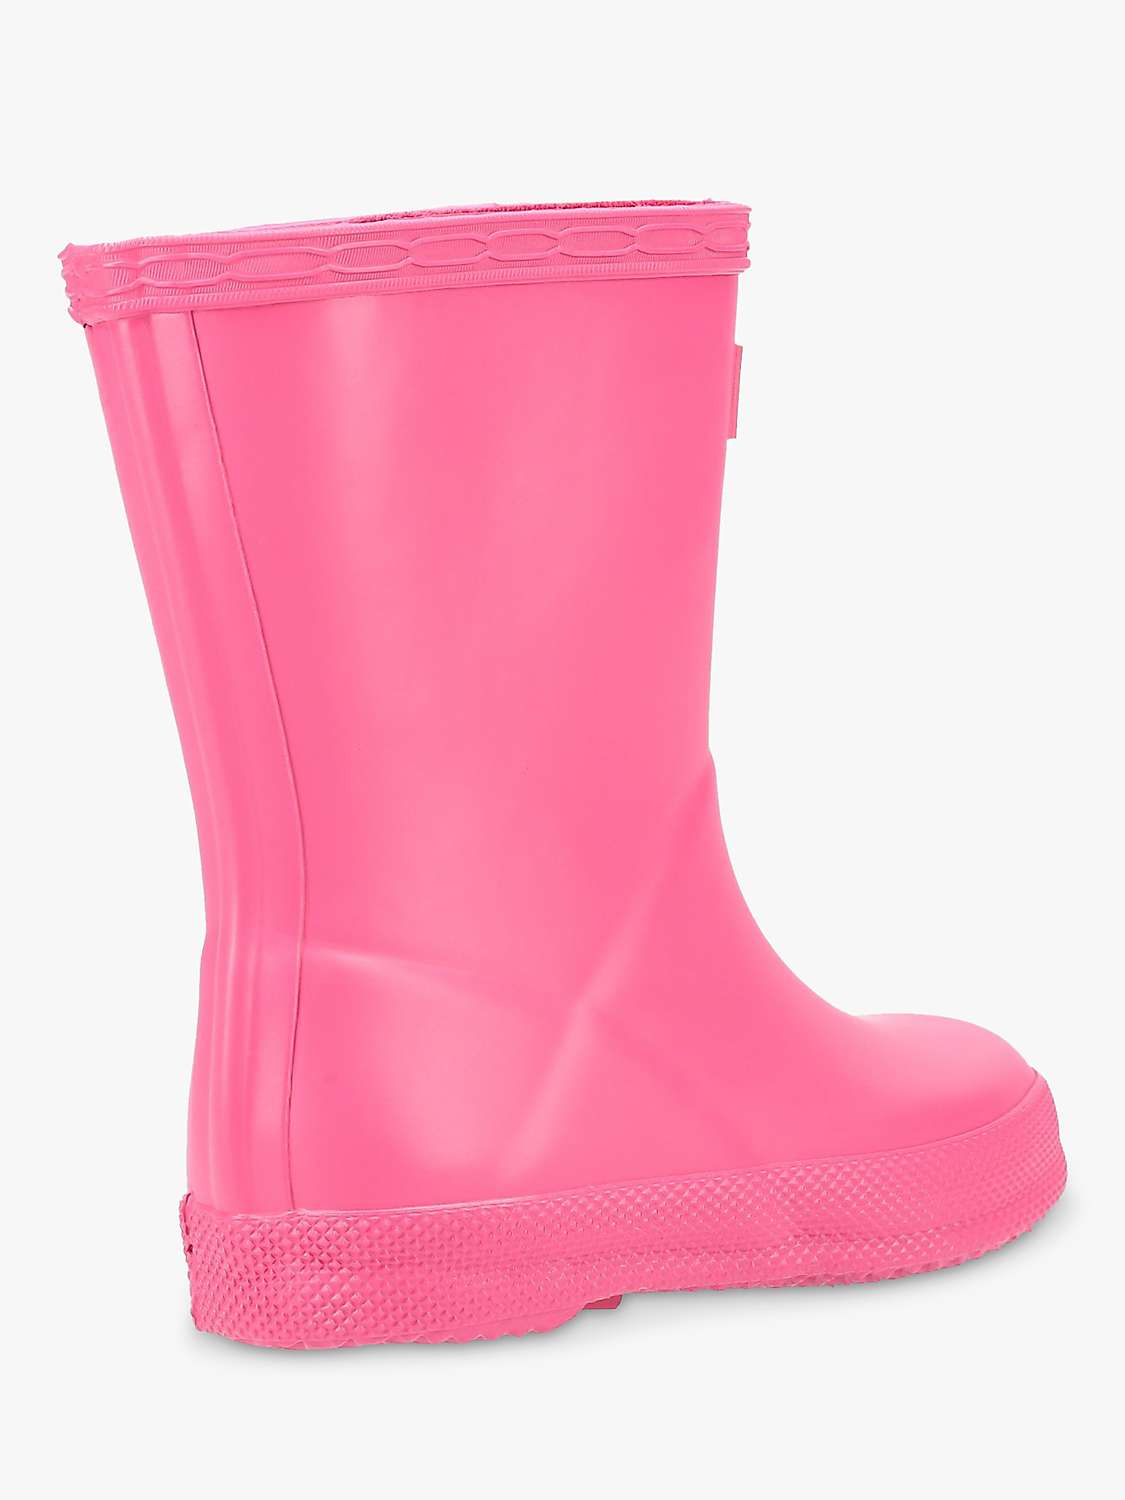 Buy Hunter Kids' First Classic Wellington Boots Online at johnlewis.com